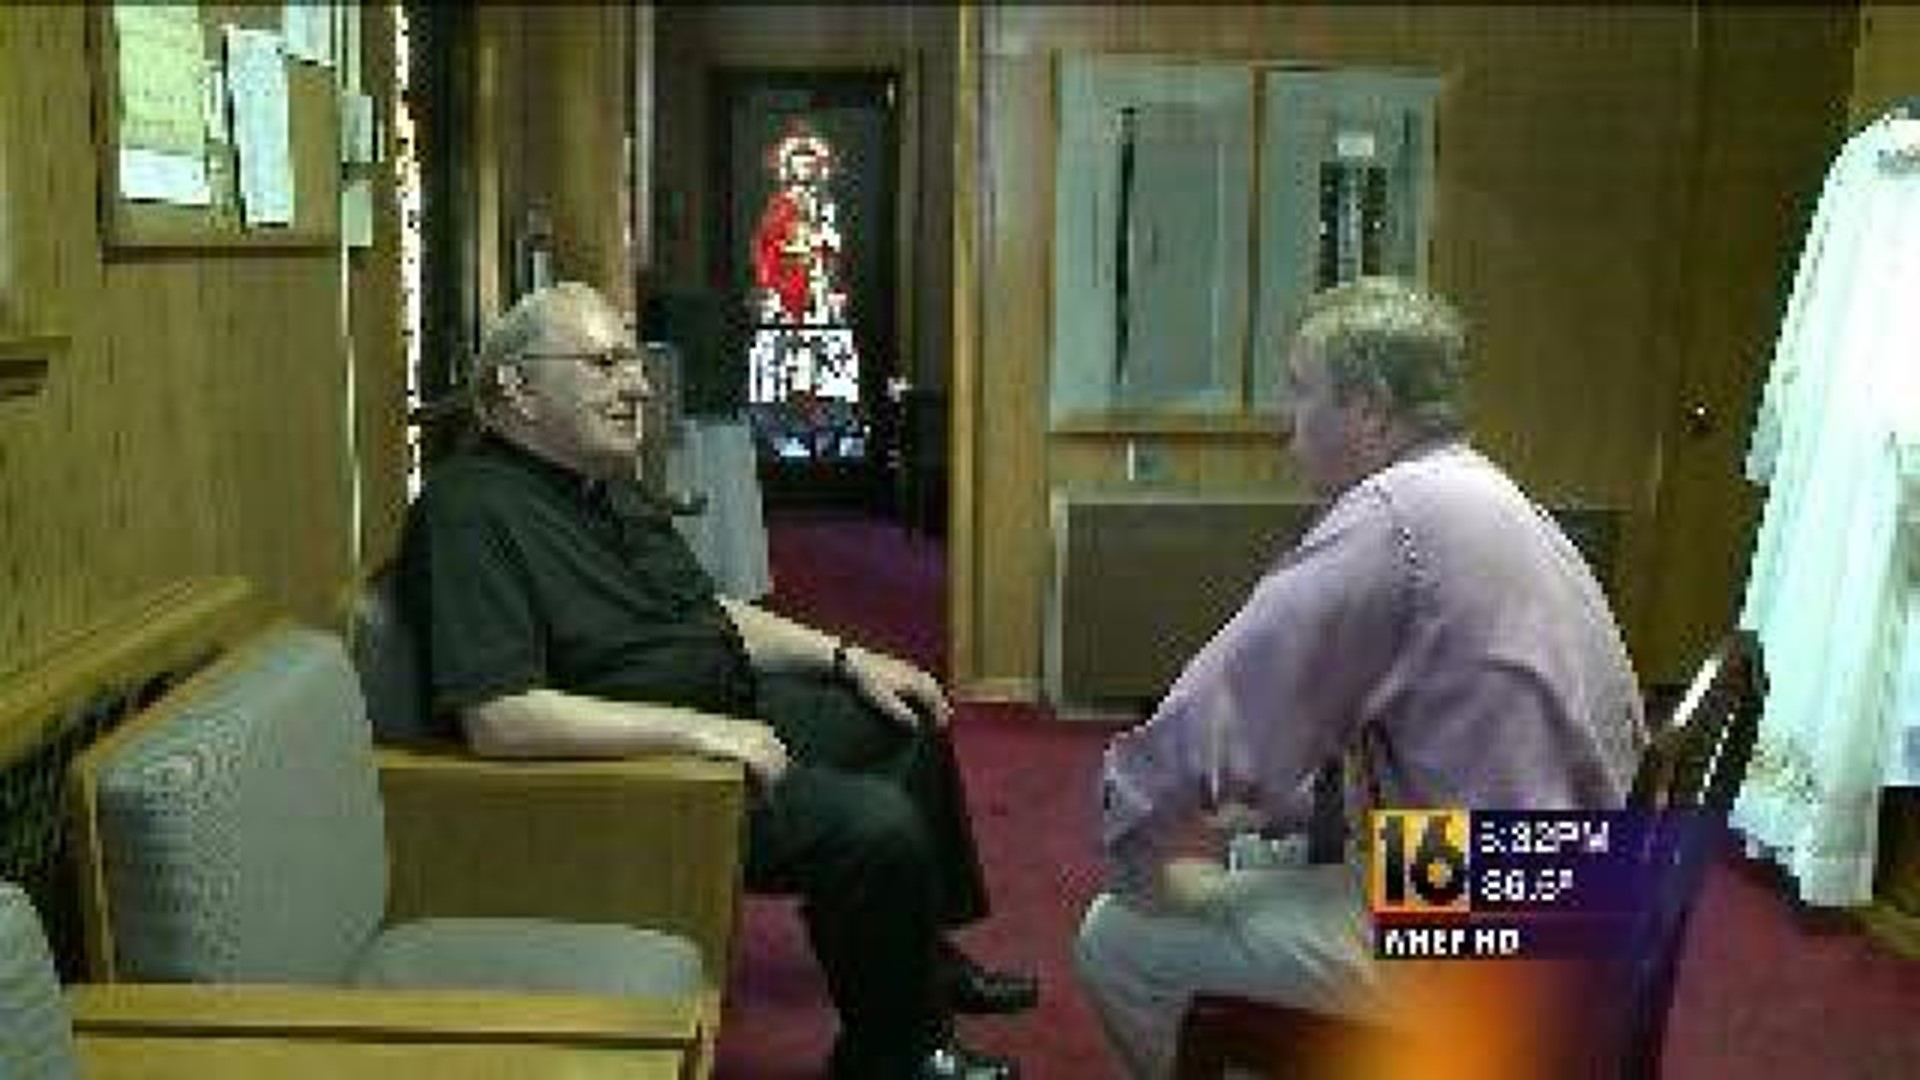 Pittston Priest Applauds Move to Canonize Two Former Popes